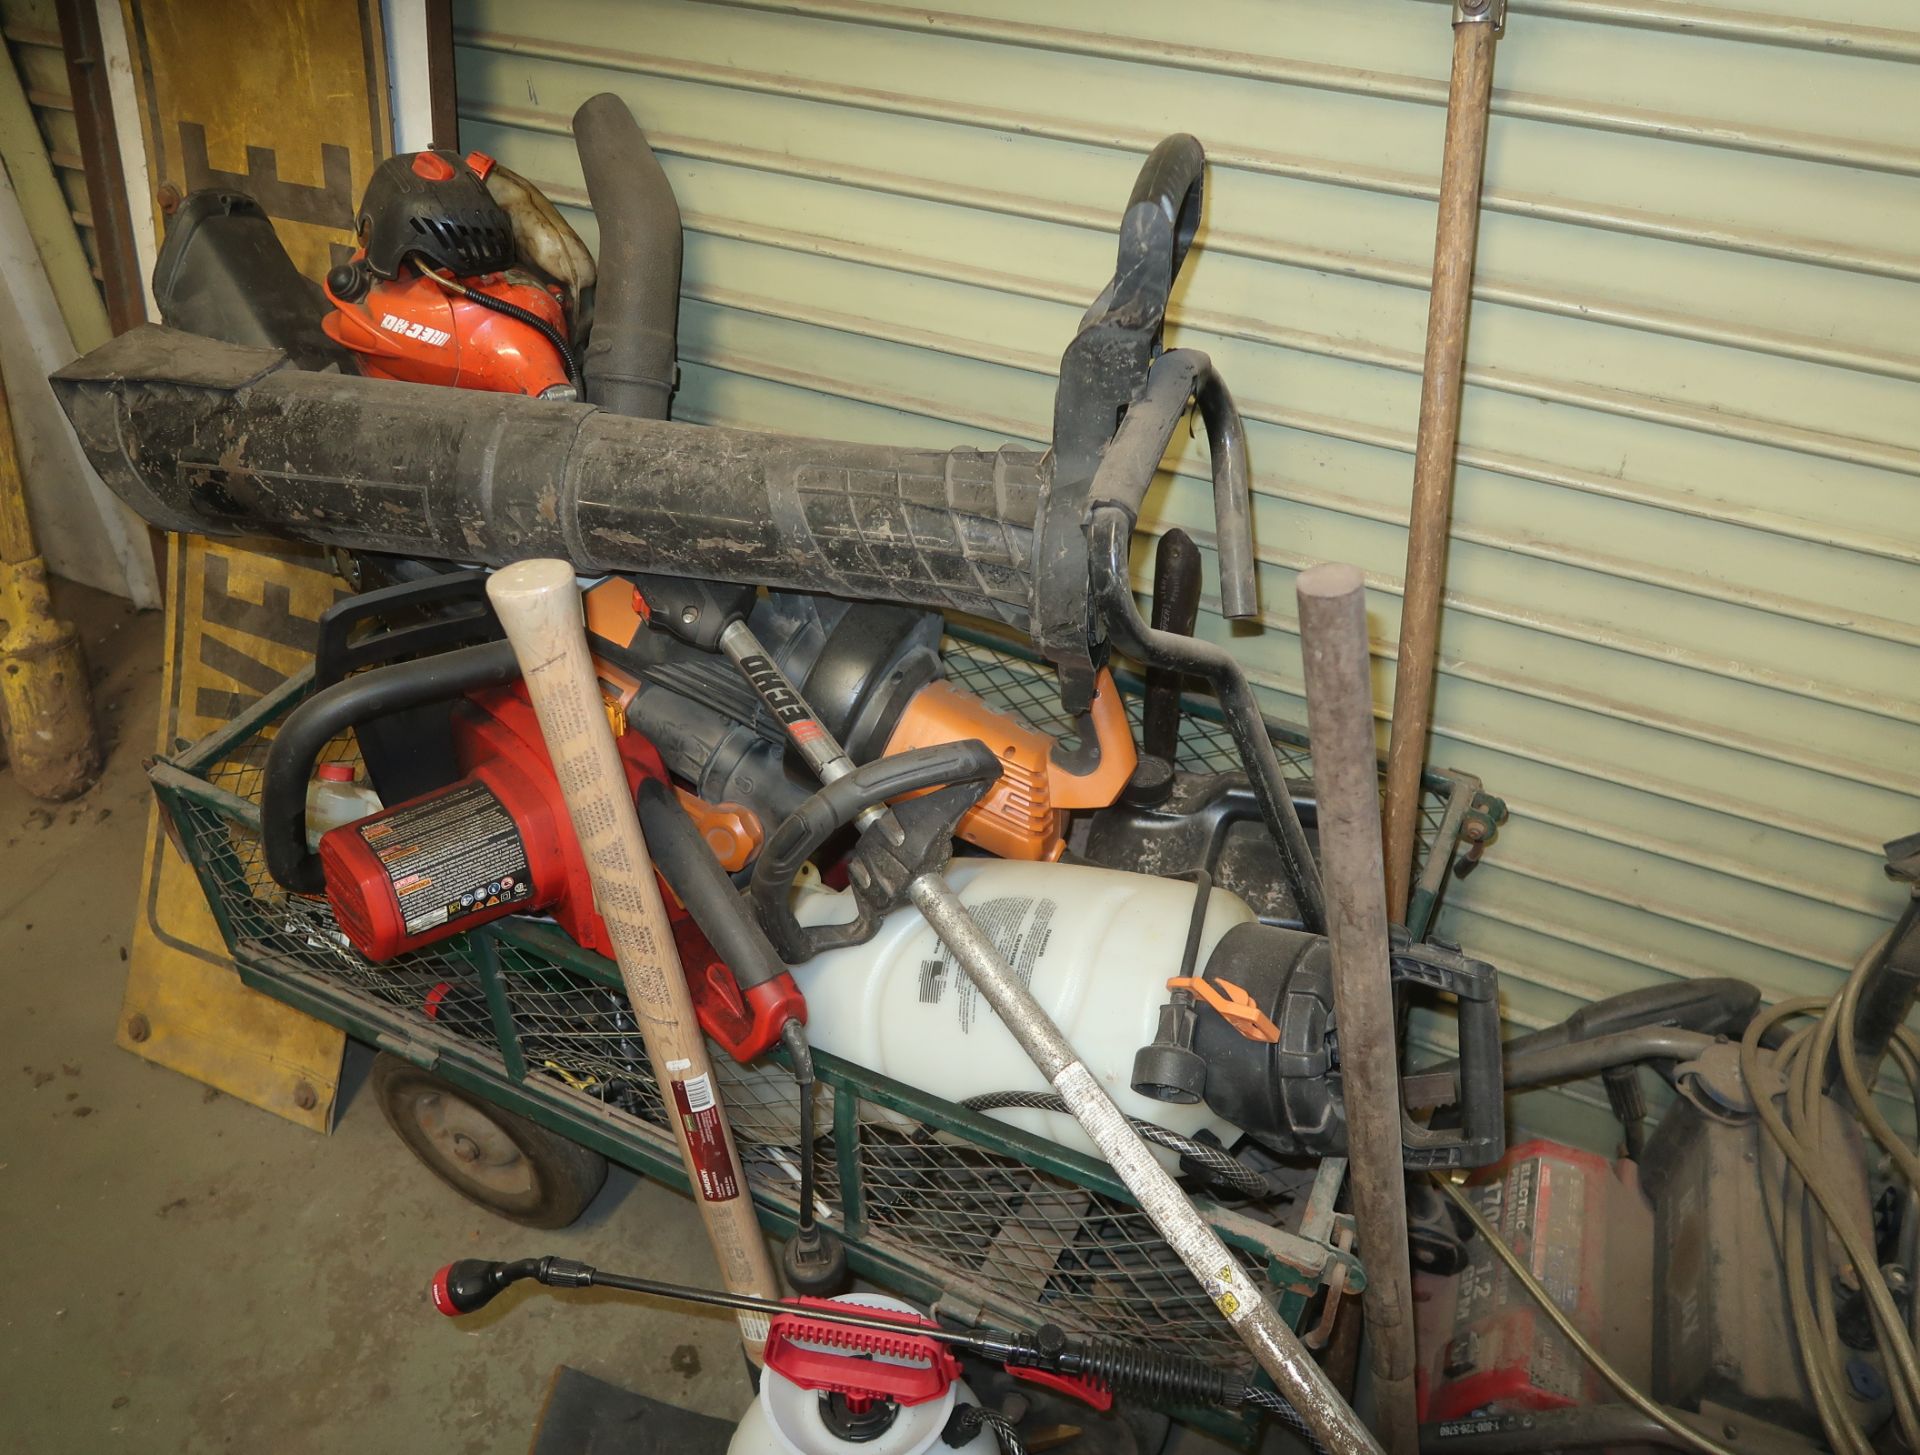 LOT ASST. LAND SCAPING TOOLS, WEED EATER, CHAIN SAW, BLOWER, PRESSURE WASHER, WAGON, ETC. - Image 2 of 2